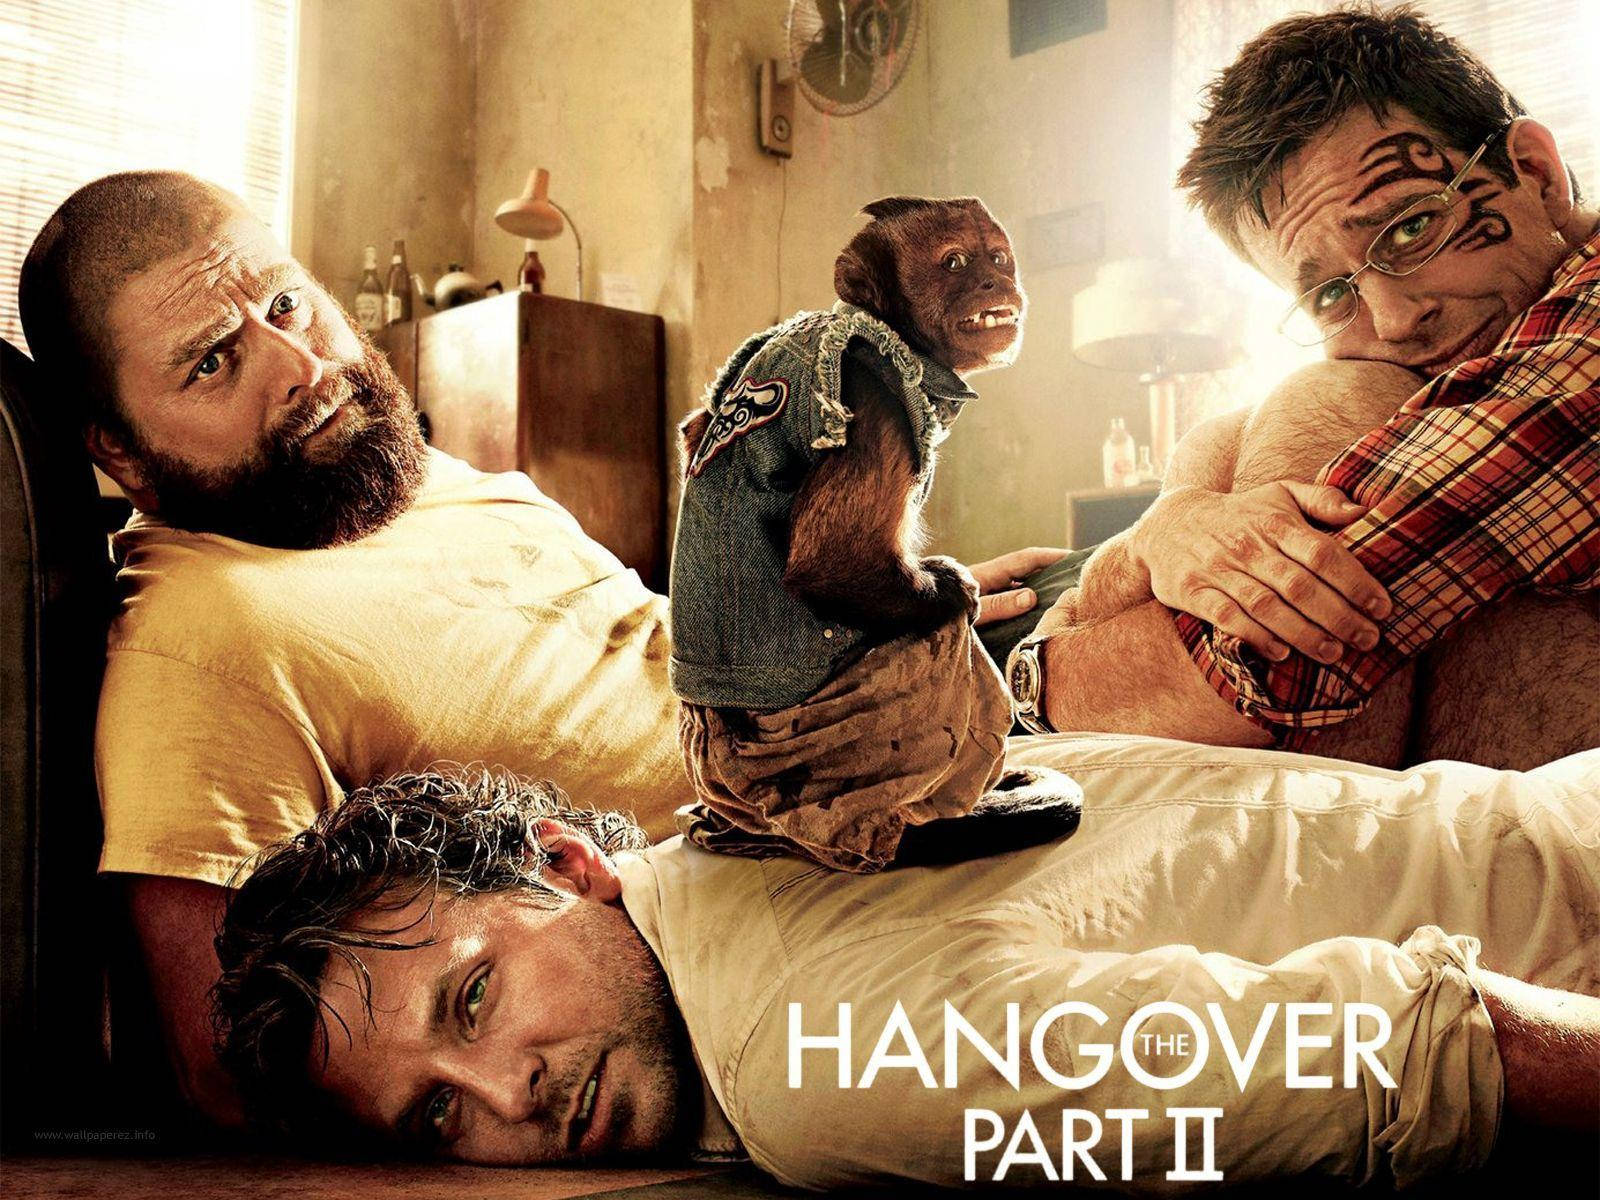 The Hangover Part Ii 2011 American Comedy Movie Background